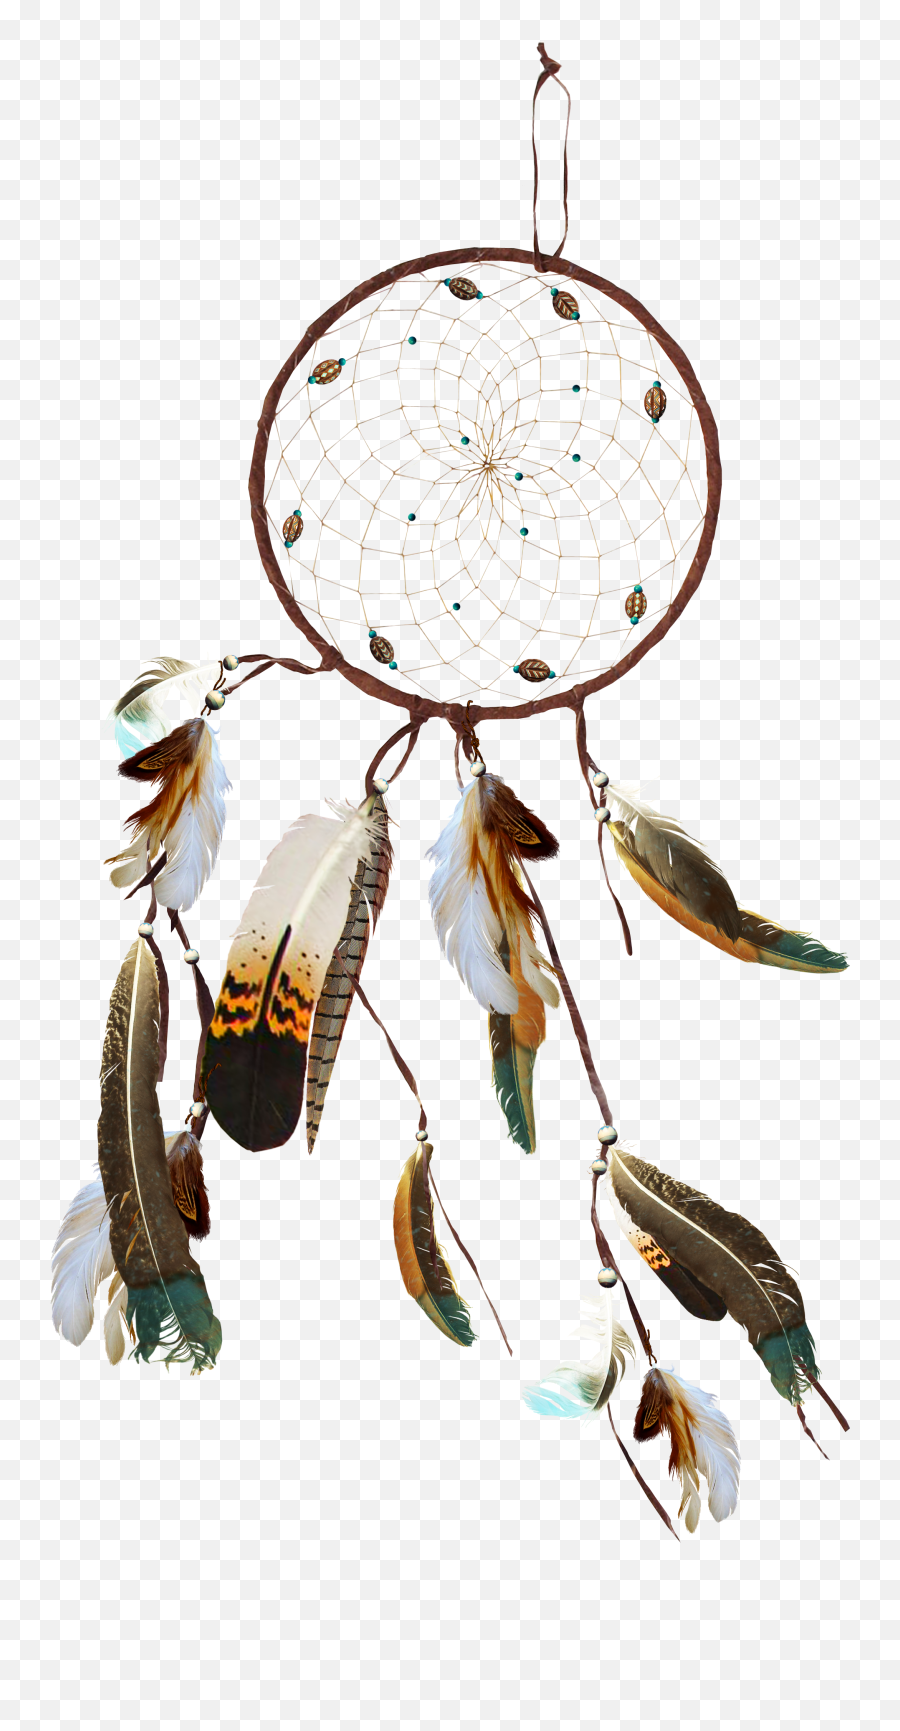 Dreamcatcher Png Free Download - High Quality Image For Free Dreamcatcher Feather Png,Dreamcatcher Icon